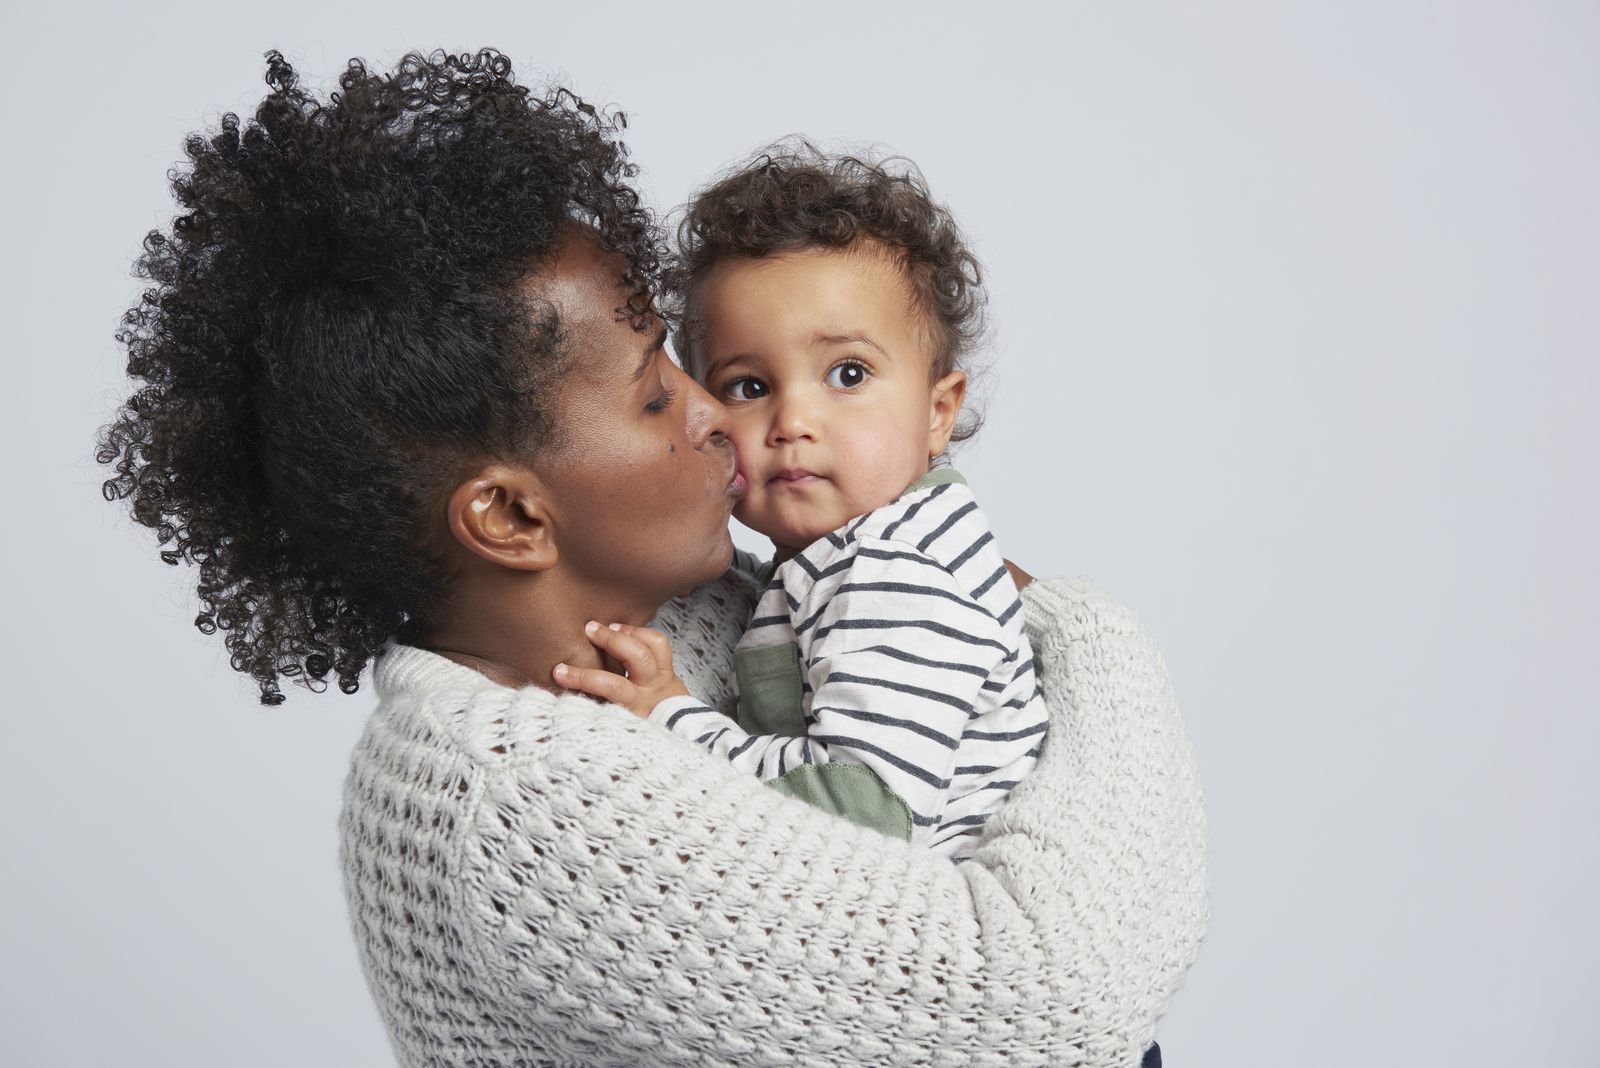 Smelling Moms’ Scent May Help Infants Bond With Strangers